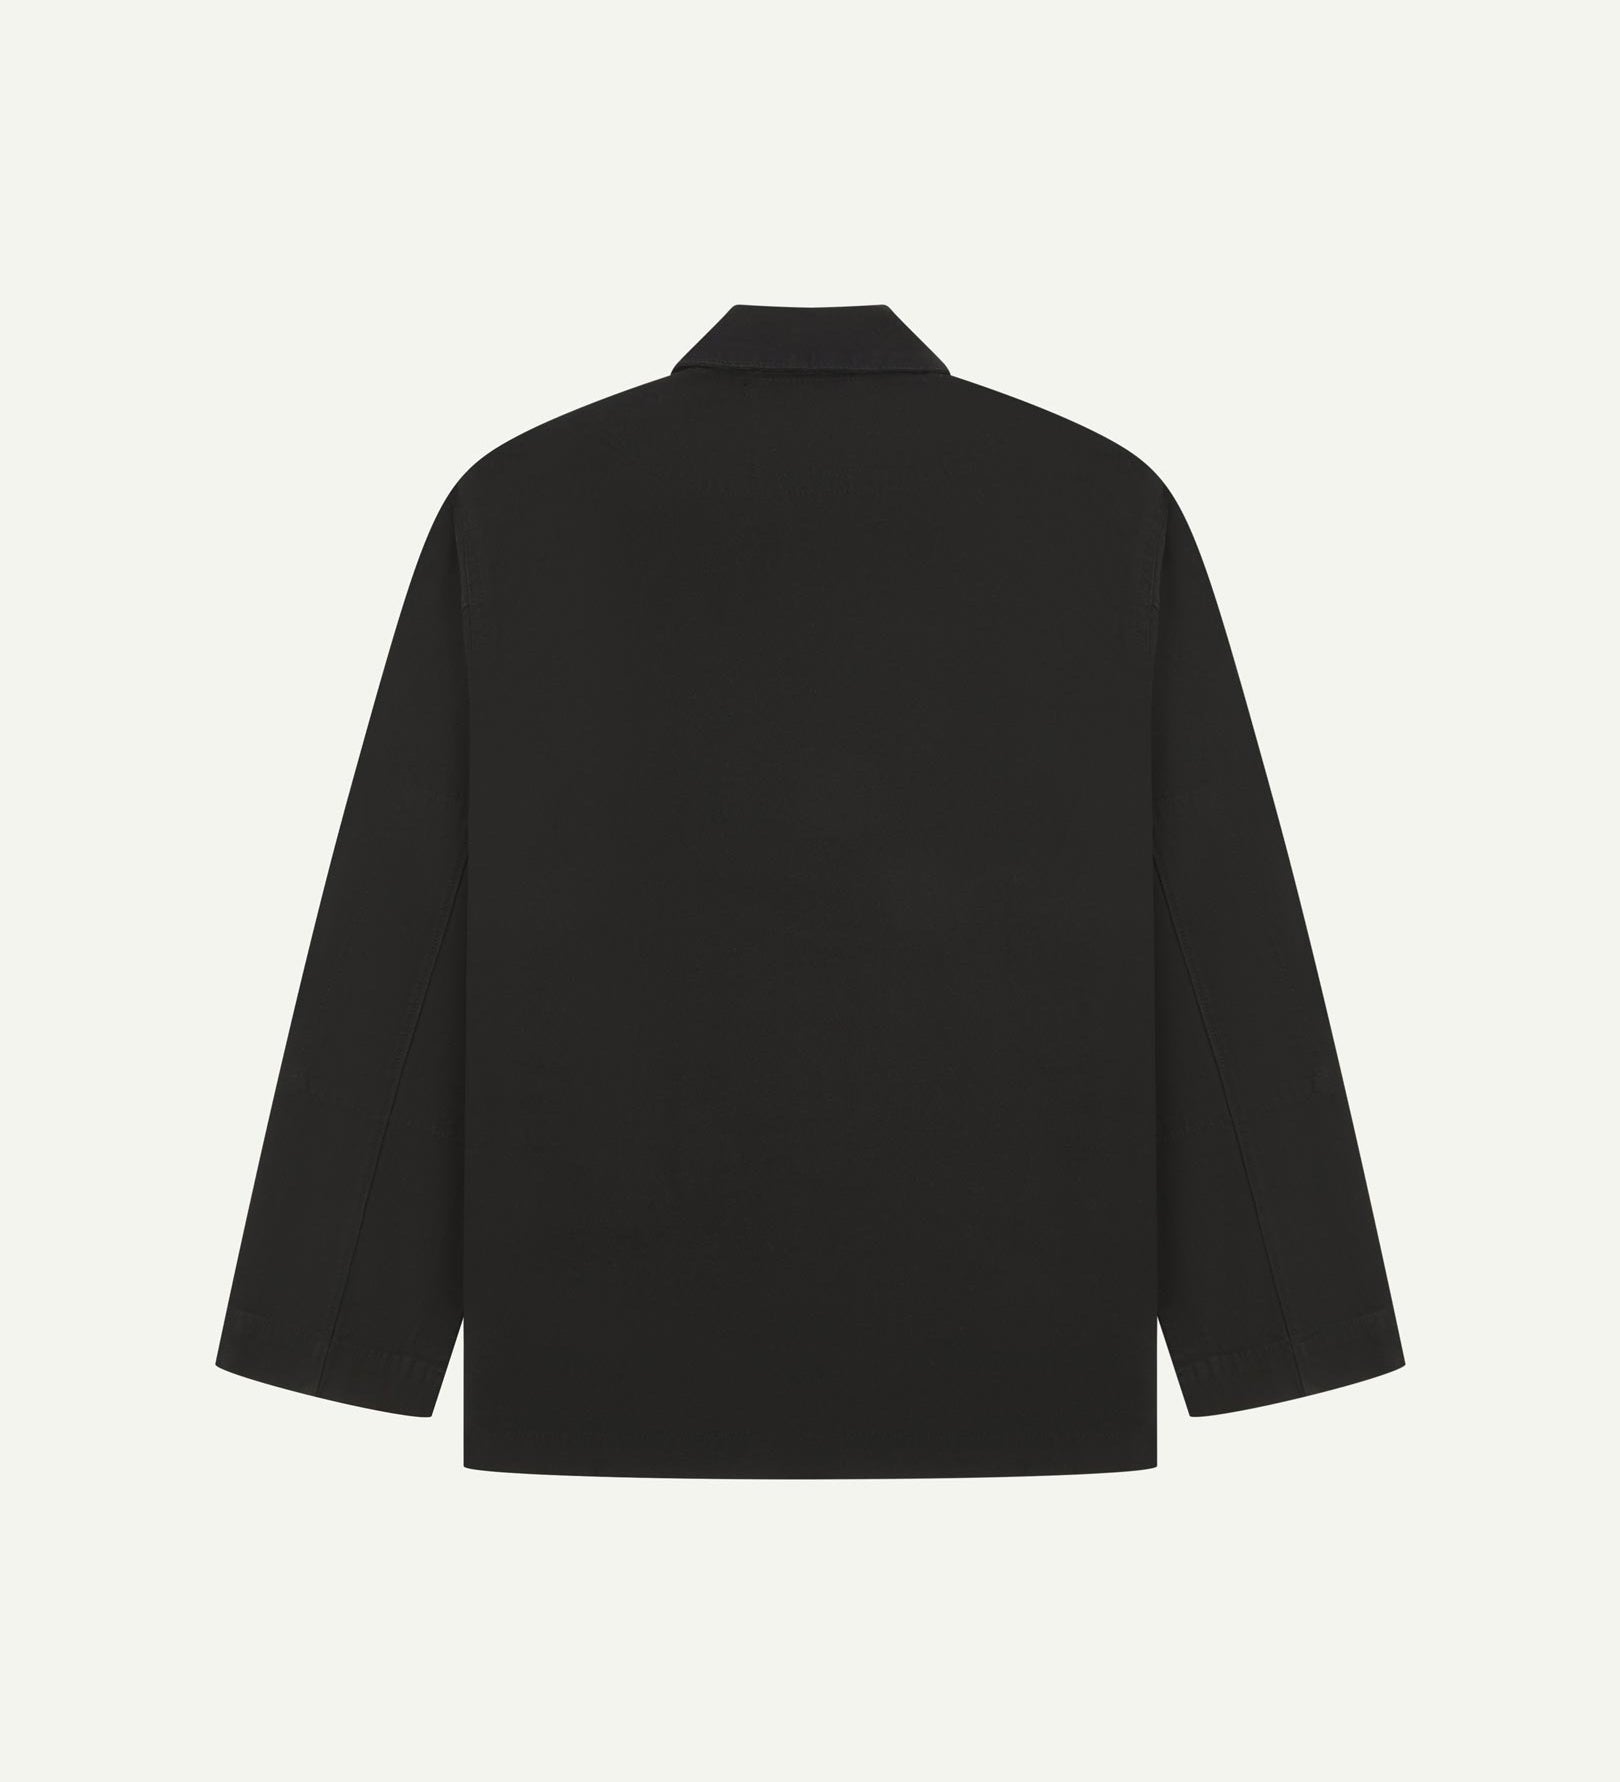 Flat back view of organic cotton black blazer from Uskees with view of reinforced elbows.